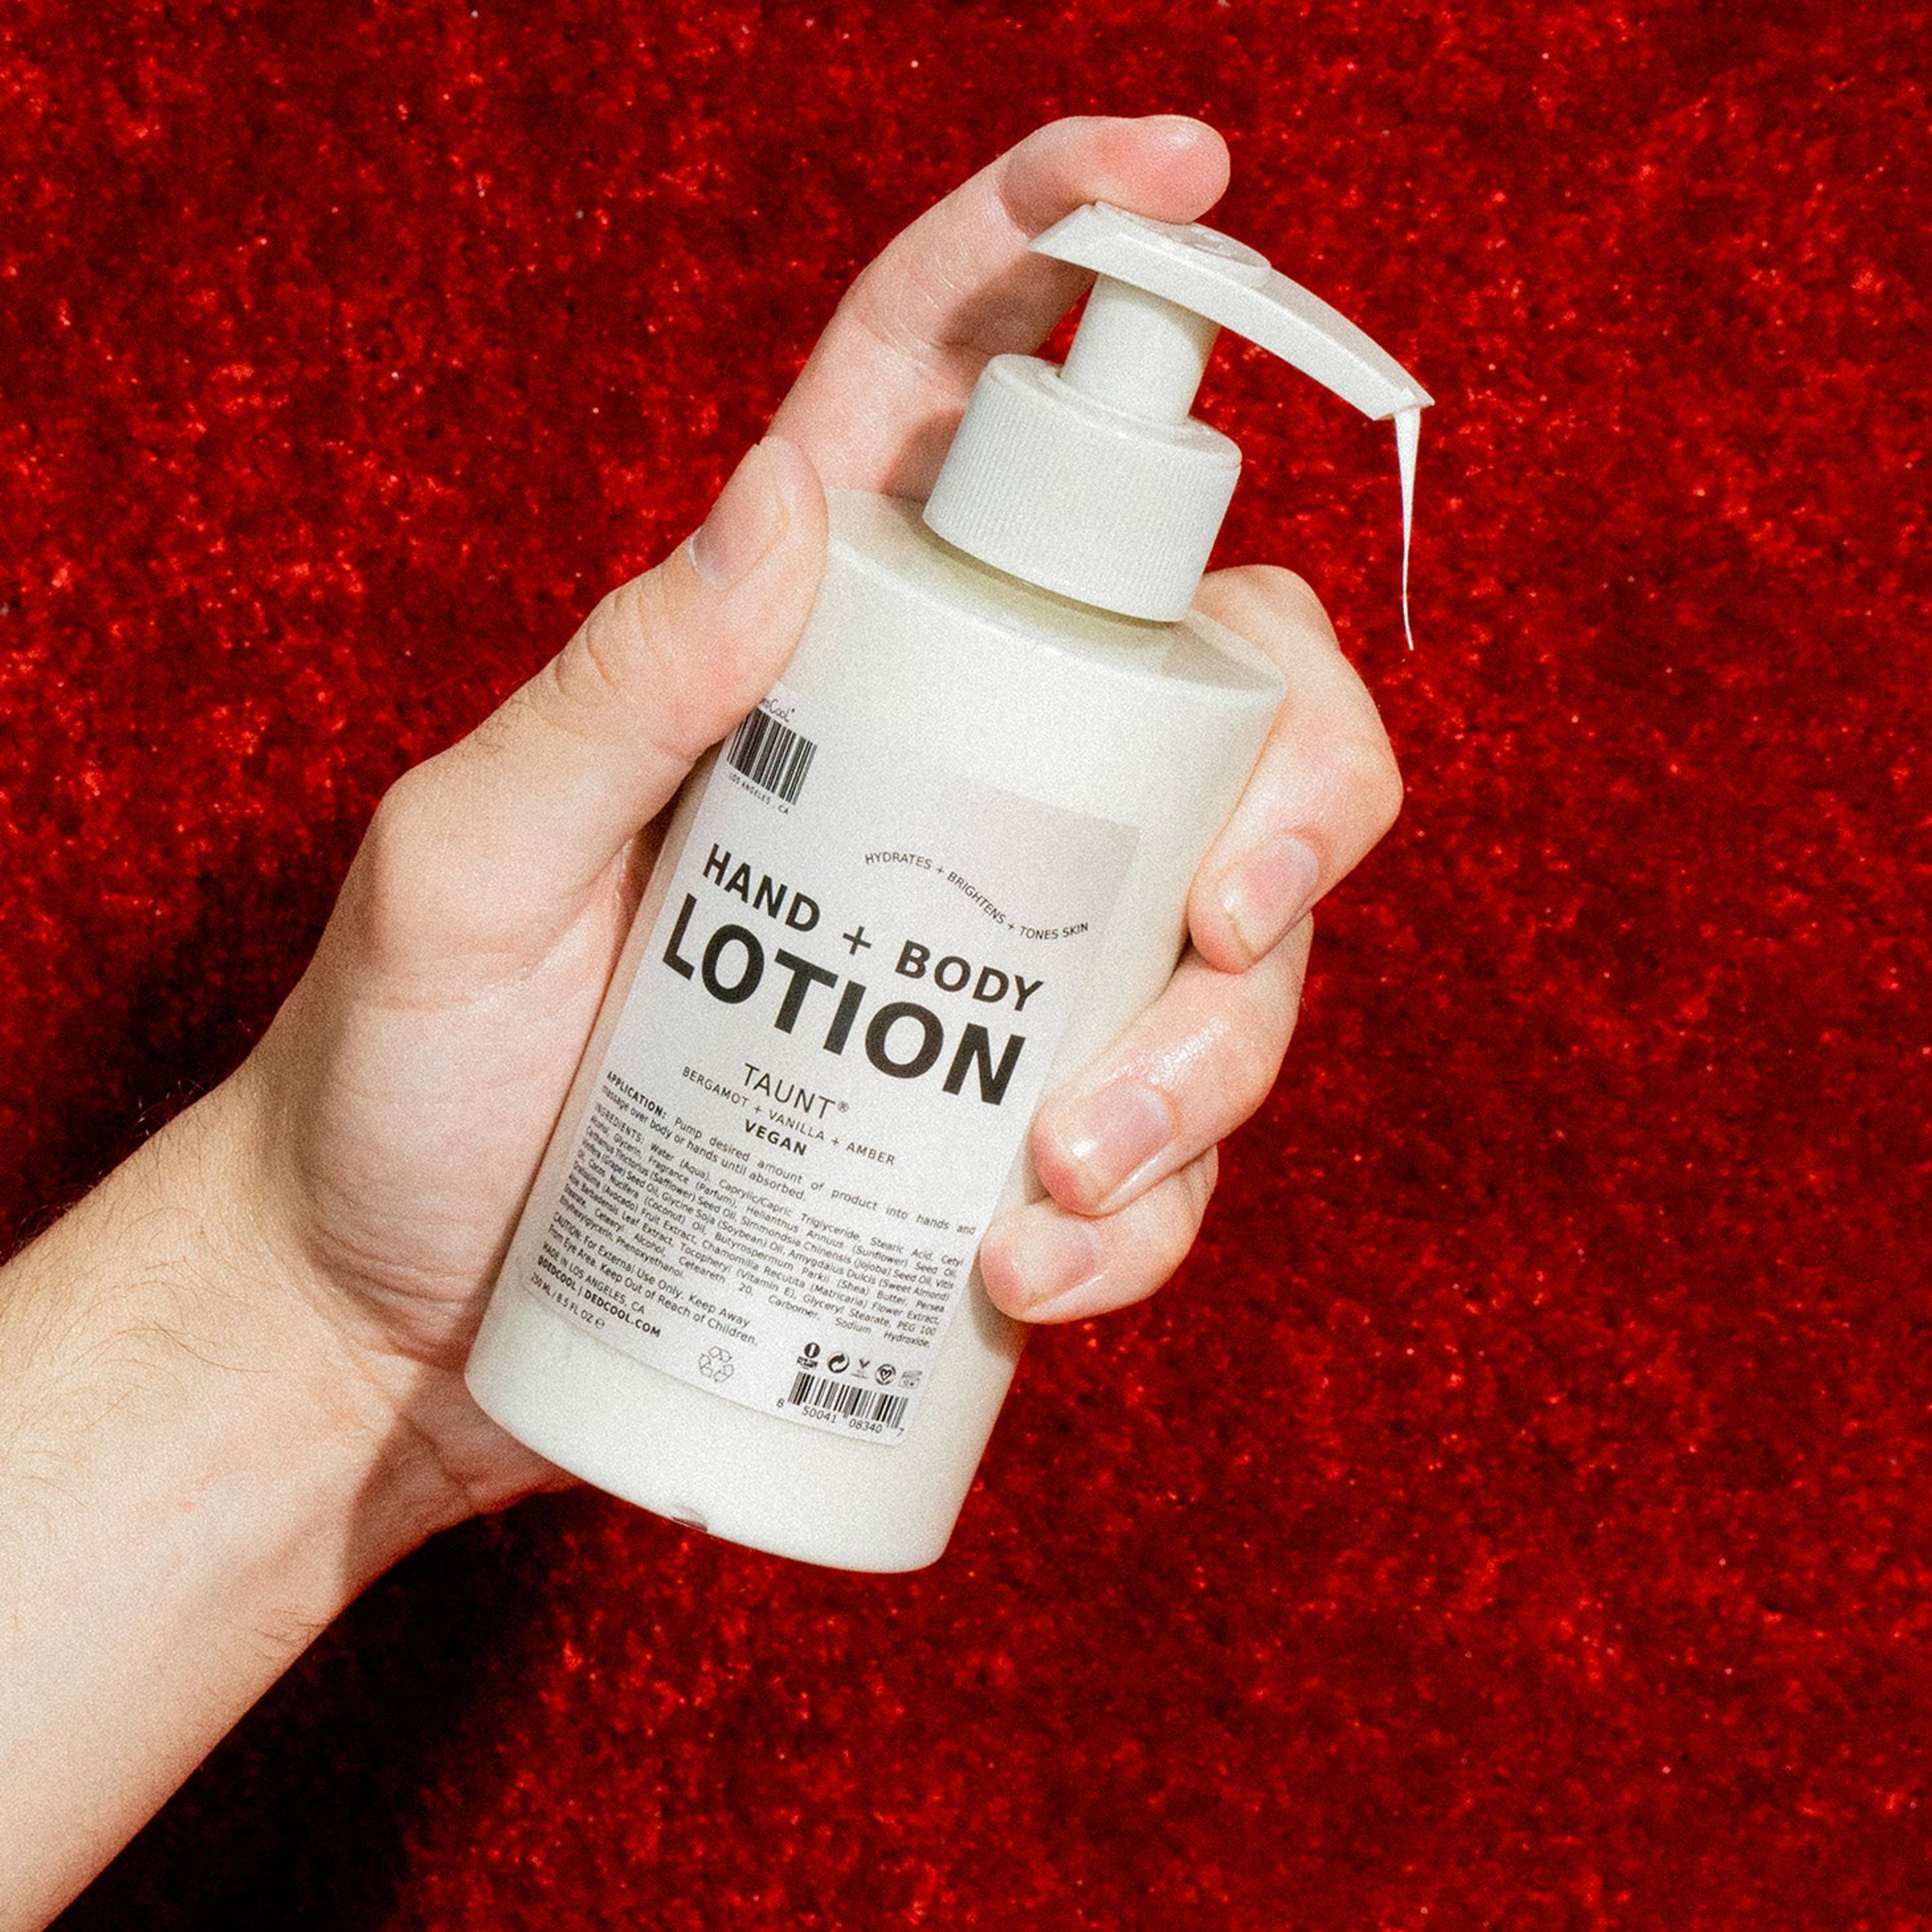 Hand + Body Lotion 01 "Taunt"